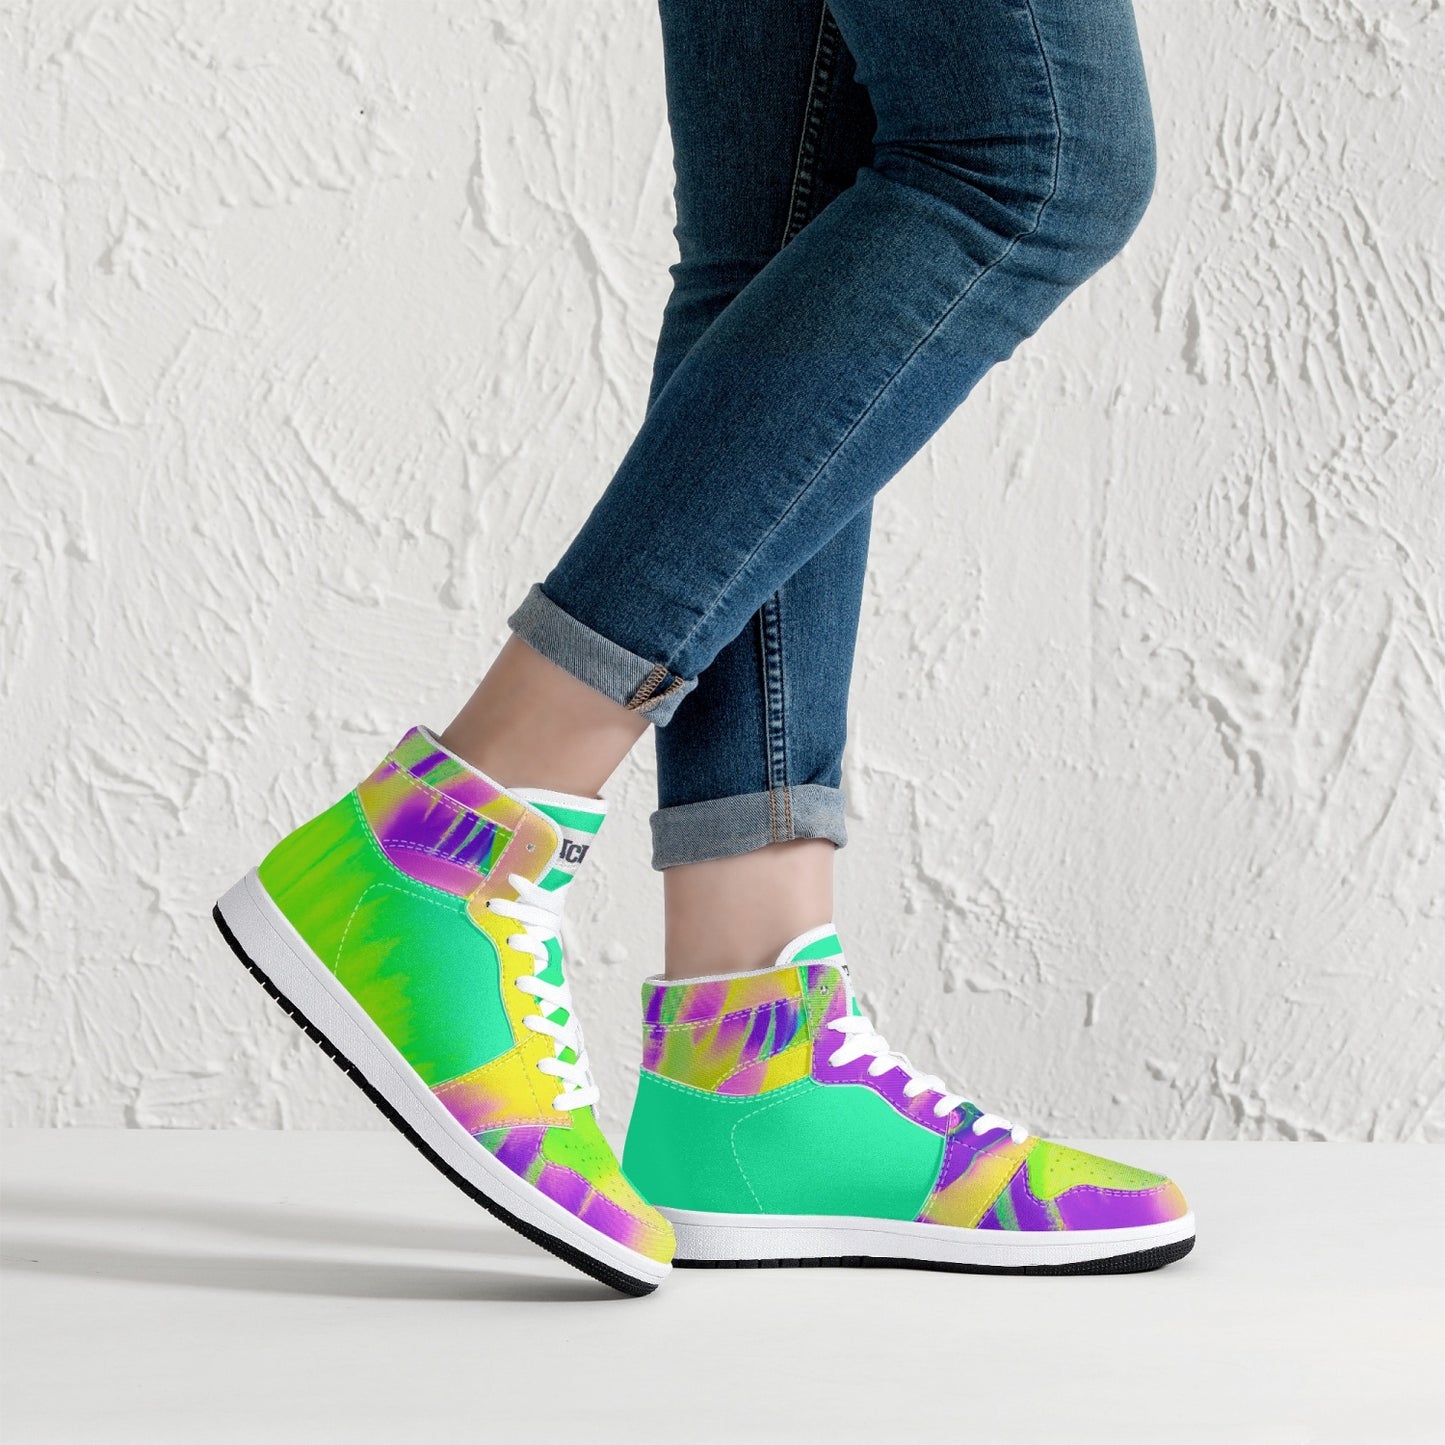 Almost Green - Macr.in (High-Top Leather Sneakers)